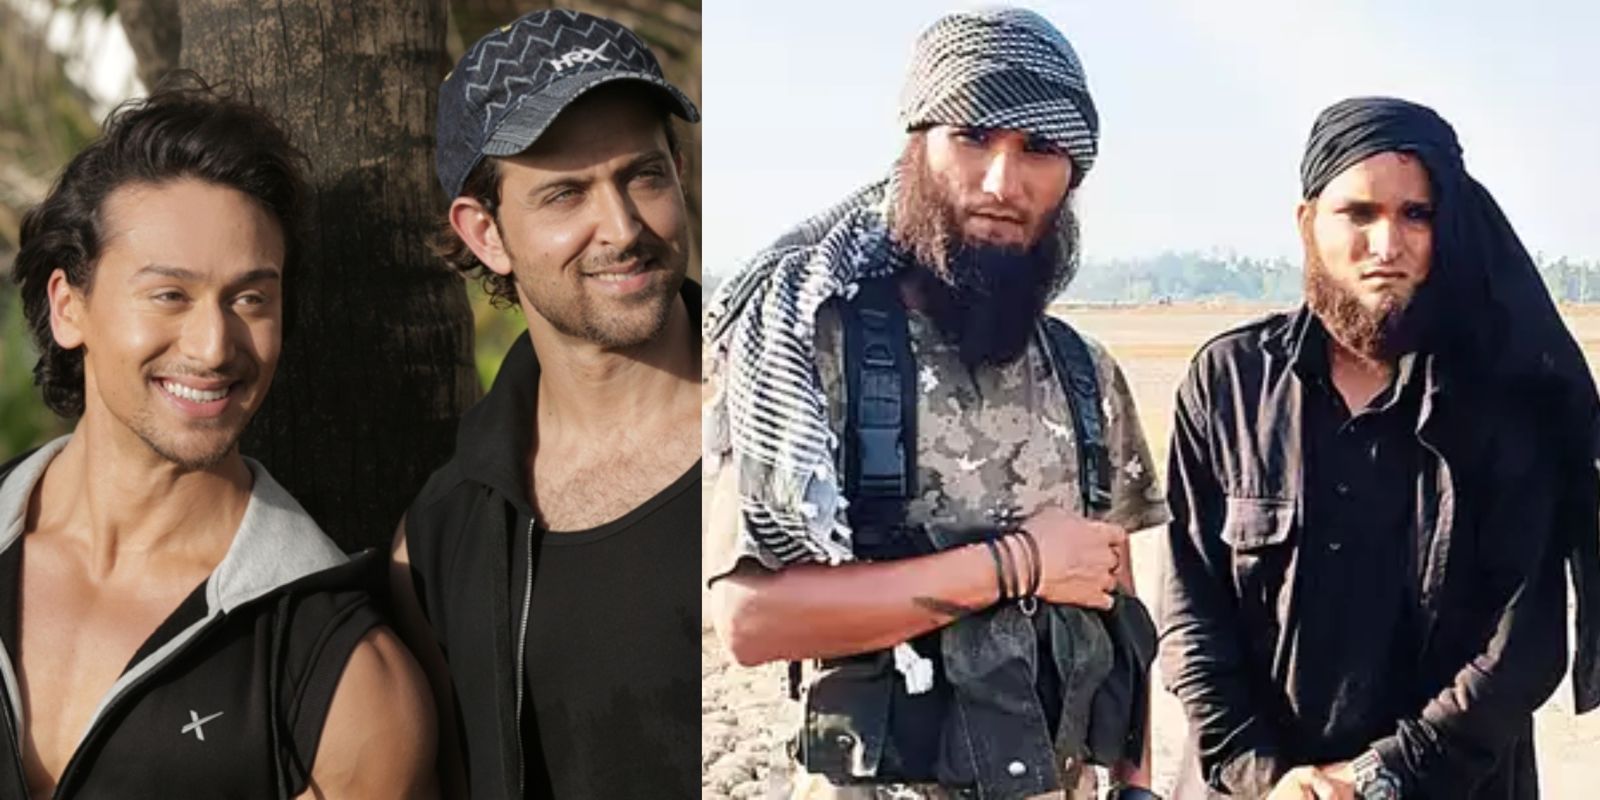 Mumbai Police Arrests Two Suspected Terrorists, Who Turn Out To Be Extras From Hrithik-Tiger Untitled Film!